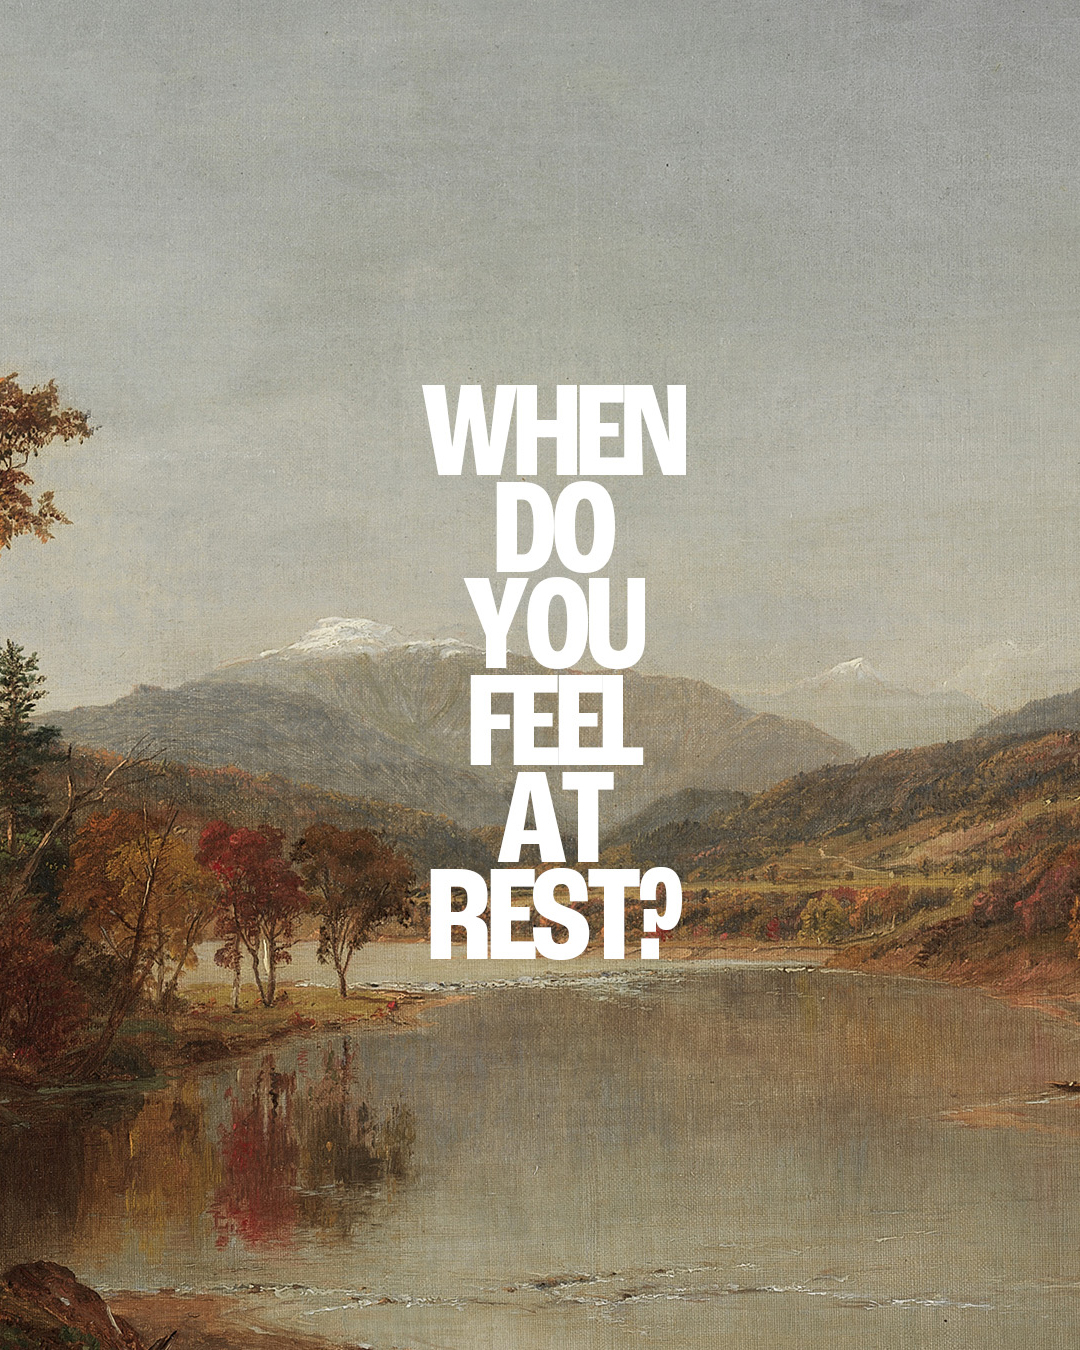 When do you feel at rest?